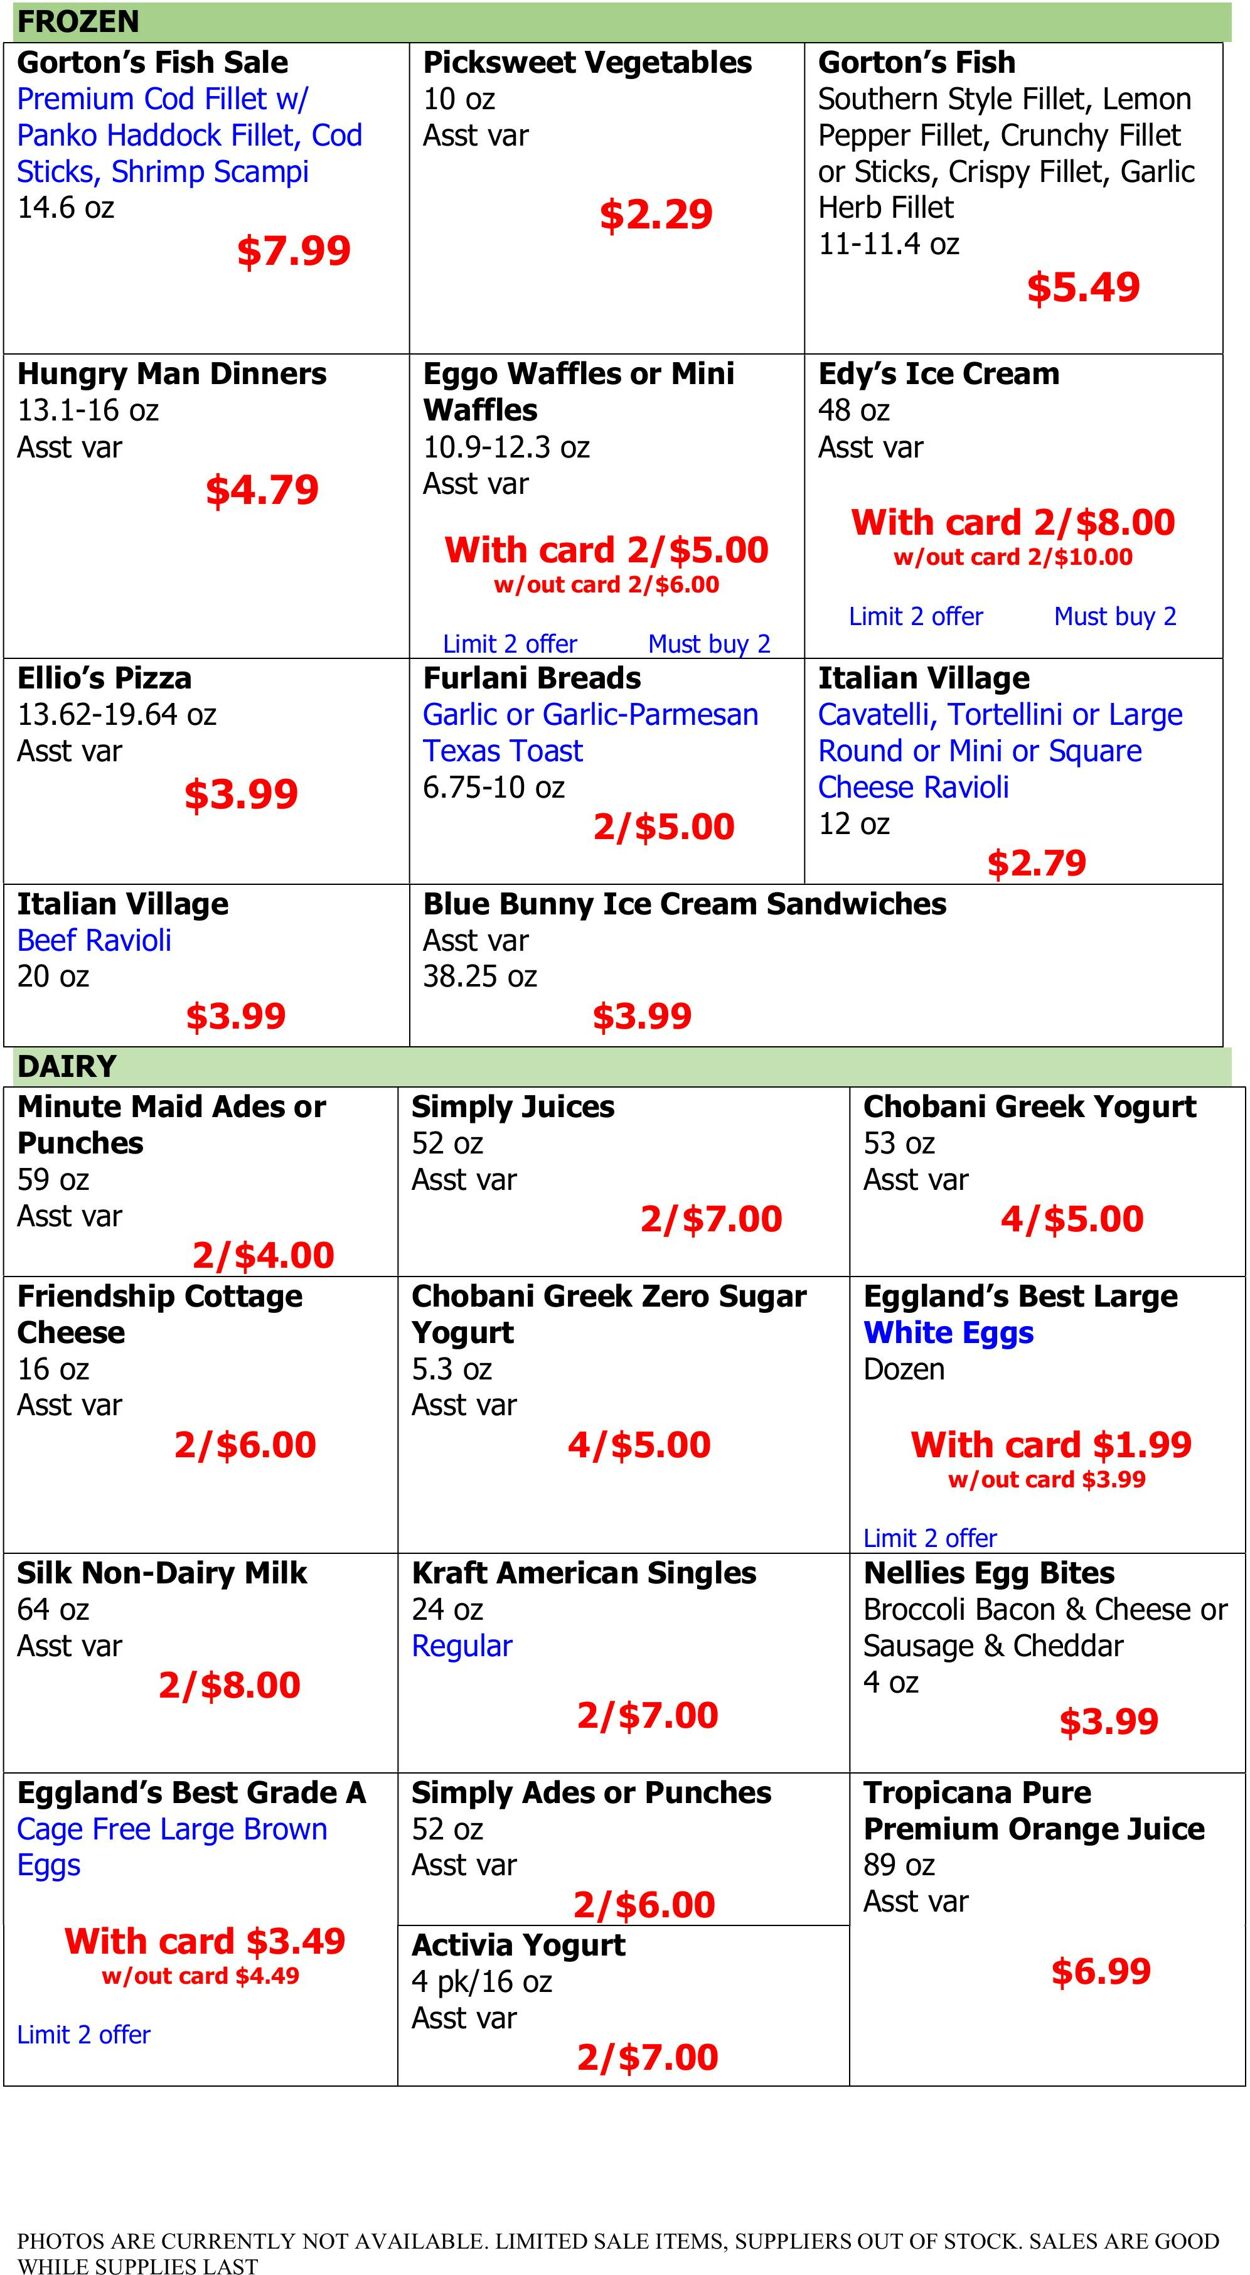 Weekly ad Country Markets of Westchester 02/23/2024 - 02/29/2024